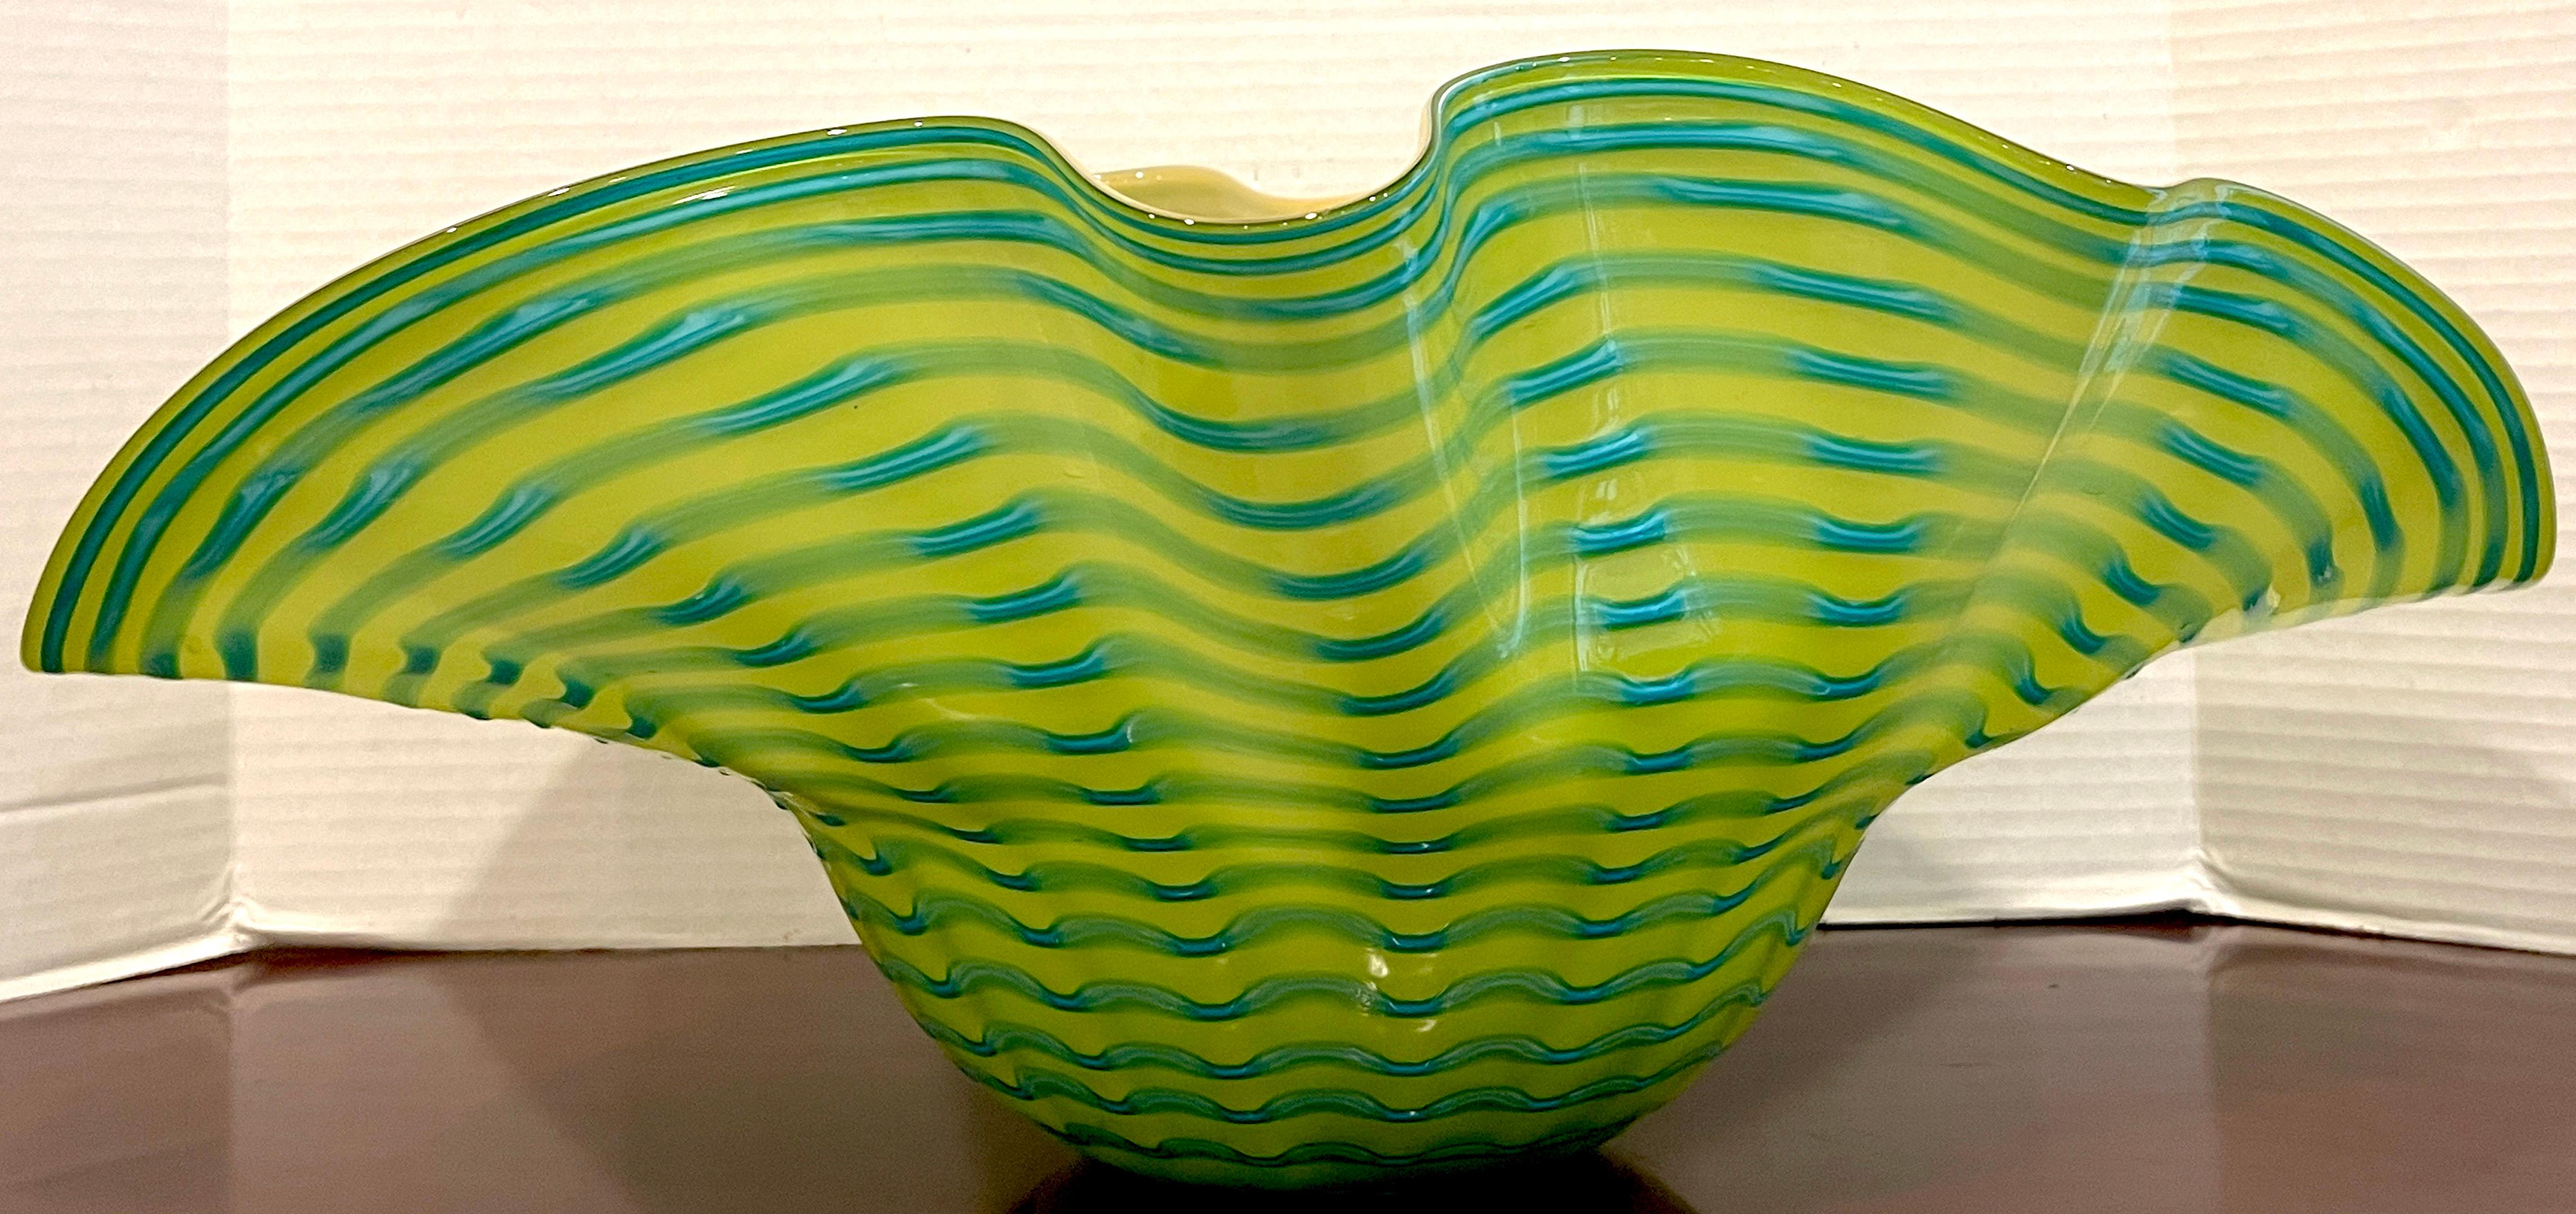 Large Murano glass seaform bowl, in the style of Chihuly
A stunning work ff large scale with seamless color transition of greens, yellow and undulating turquoise lines.
The bowl has 22-Inch Width x Varying 16.5-Inch Depth x 9-Inches High
Unsigned.